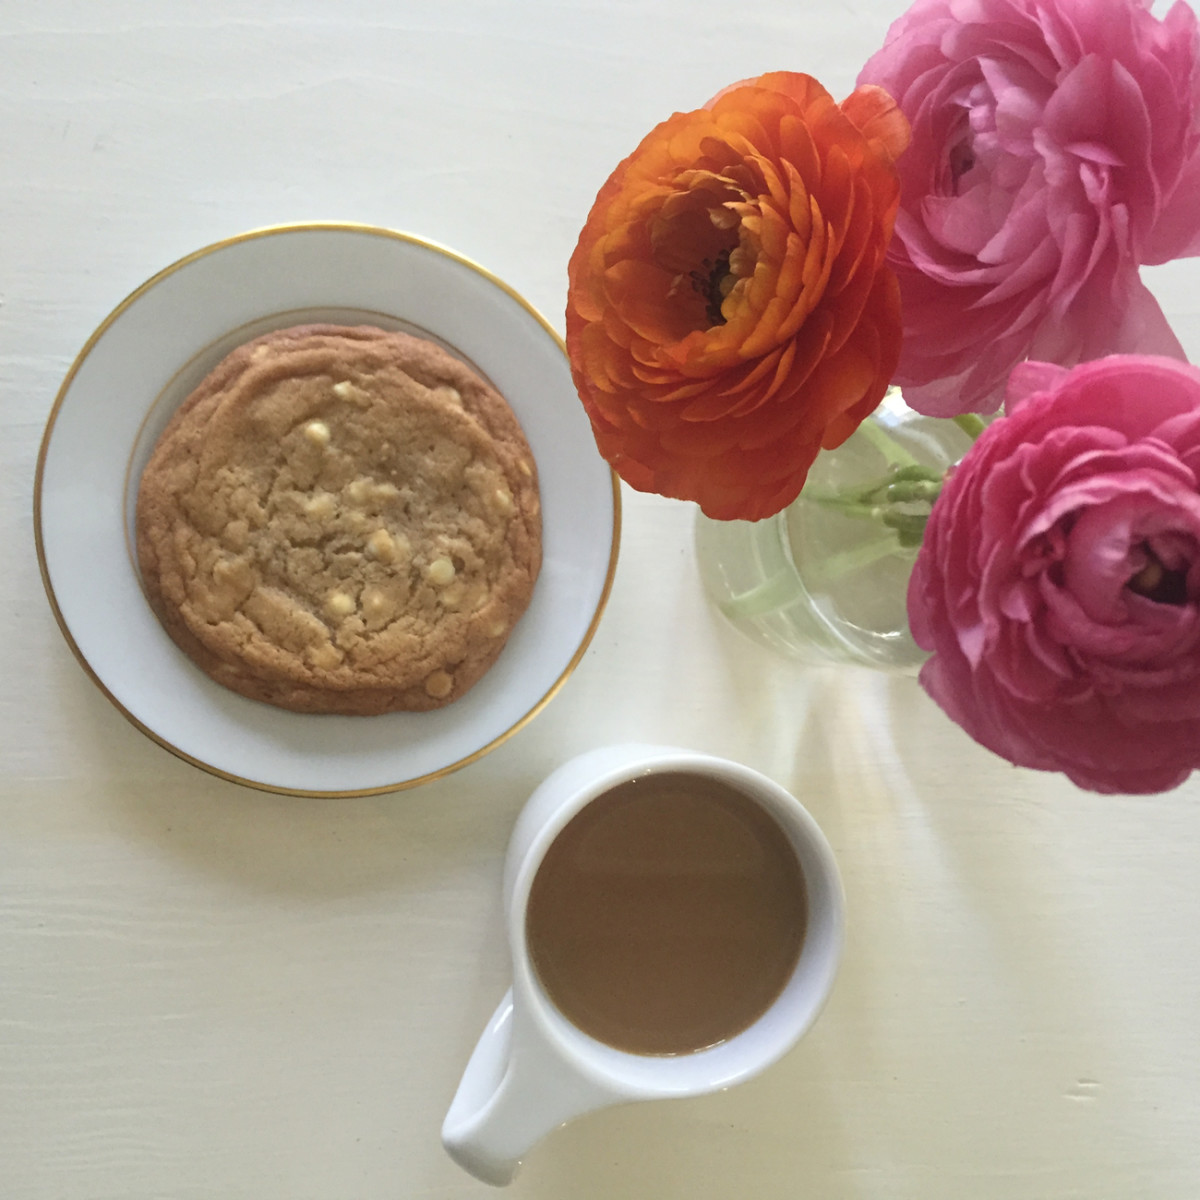 {Afternoon snack: homemade white chocolate chip cookie + coffee}